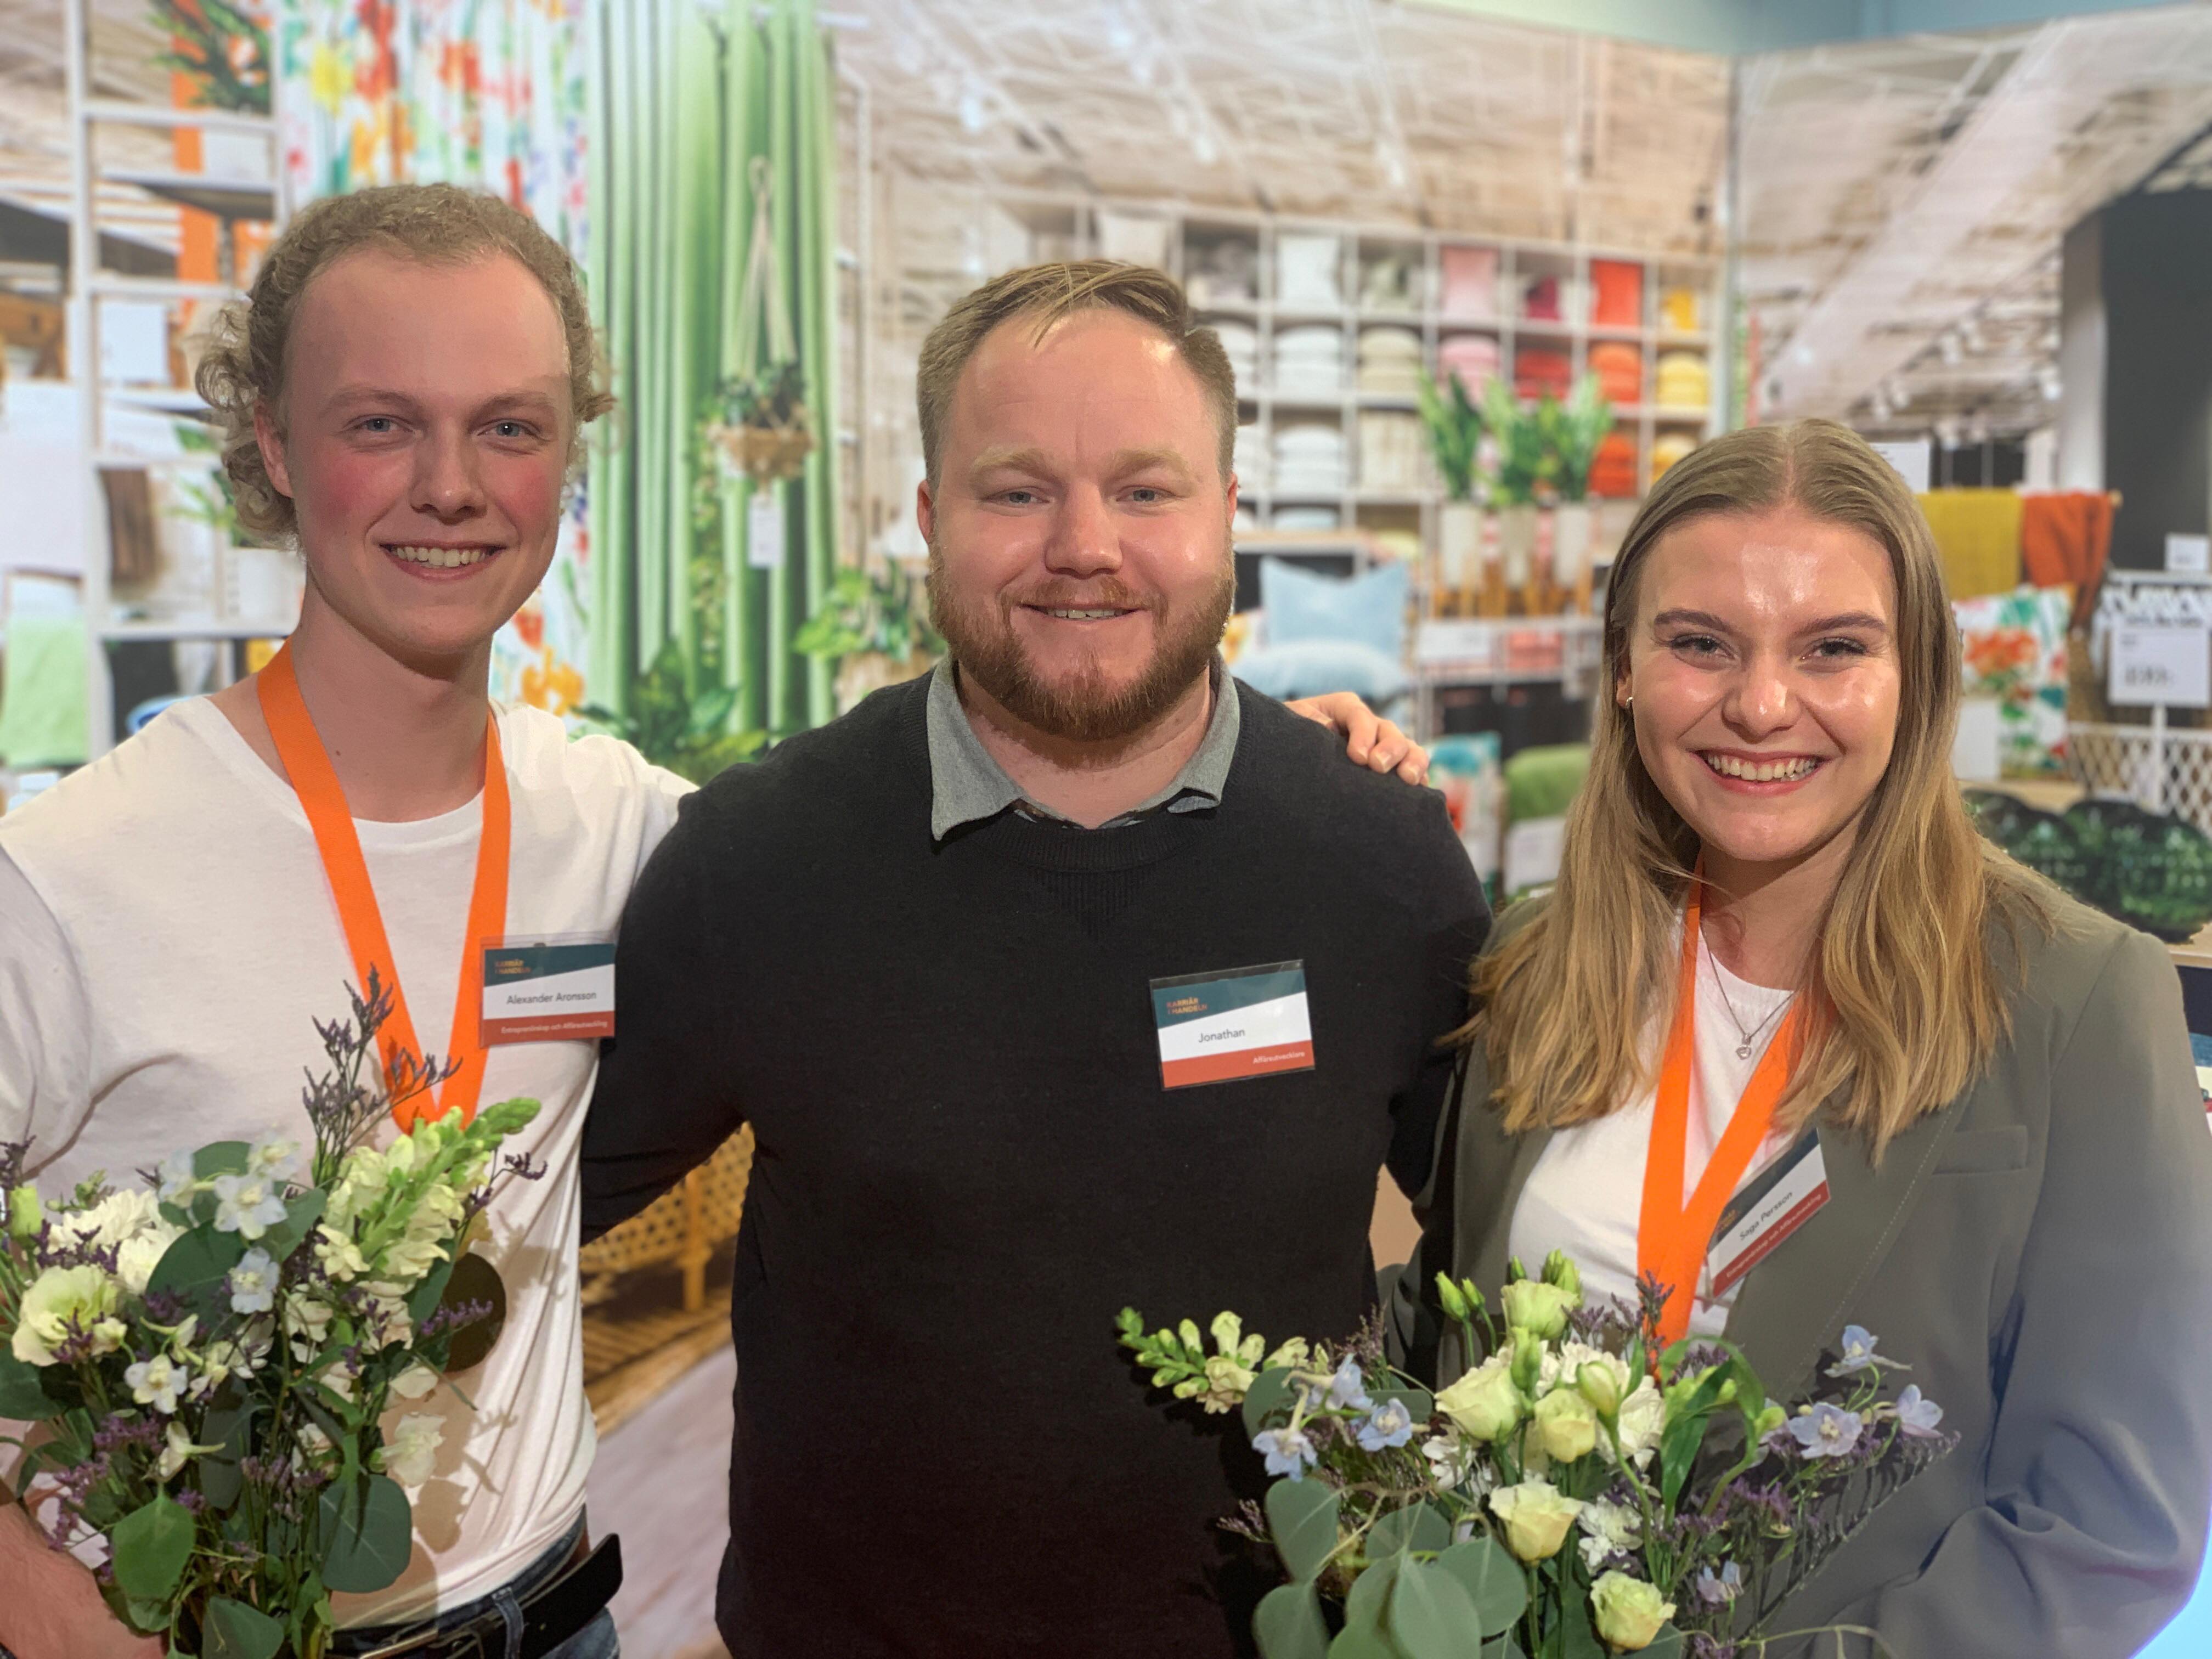 The JU student Alexander Aronsson (to the left) will compete in the Swedish National Skills Competition in Växjö with Saga Persson (pictured), Lund University. Jonathan Rudman (pictured) is CEO at Emax.